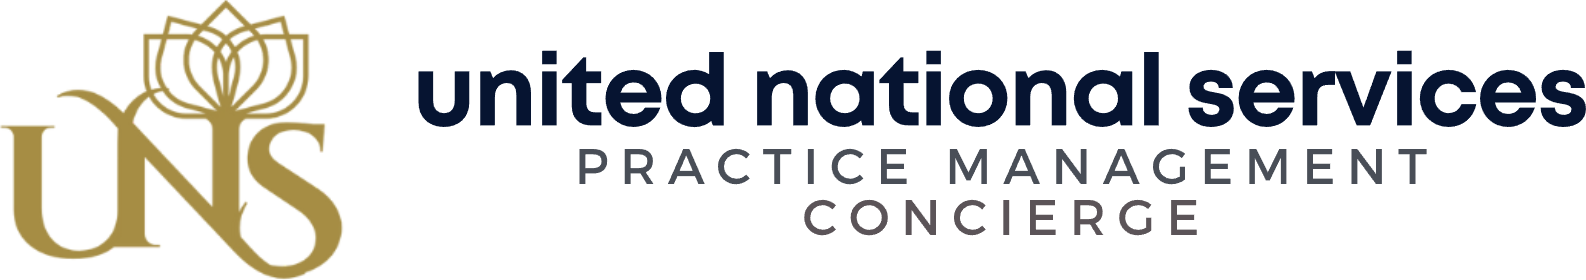 united-national-services-logo